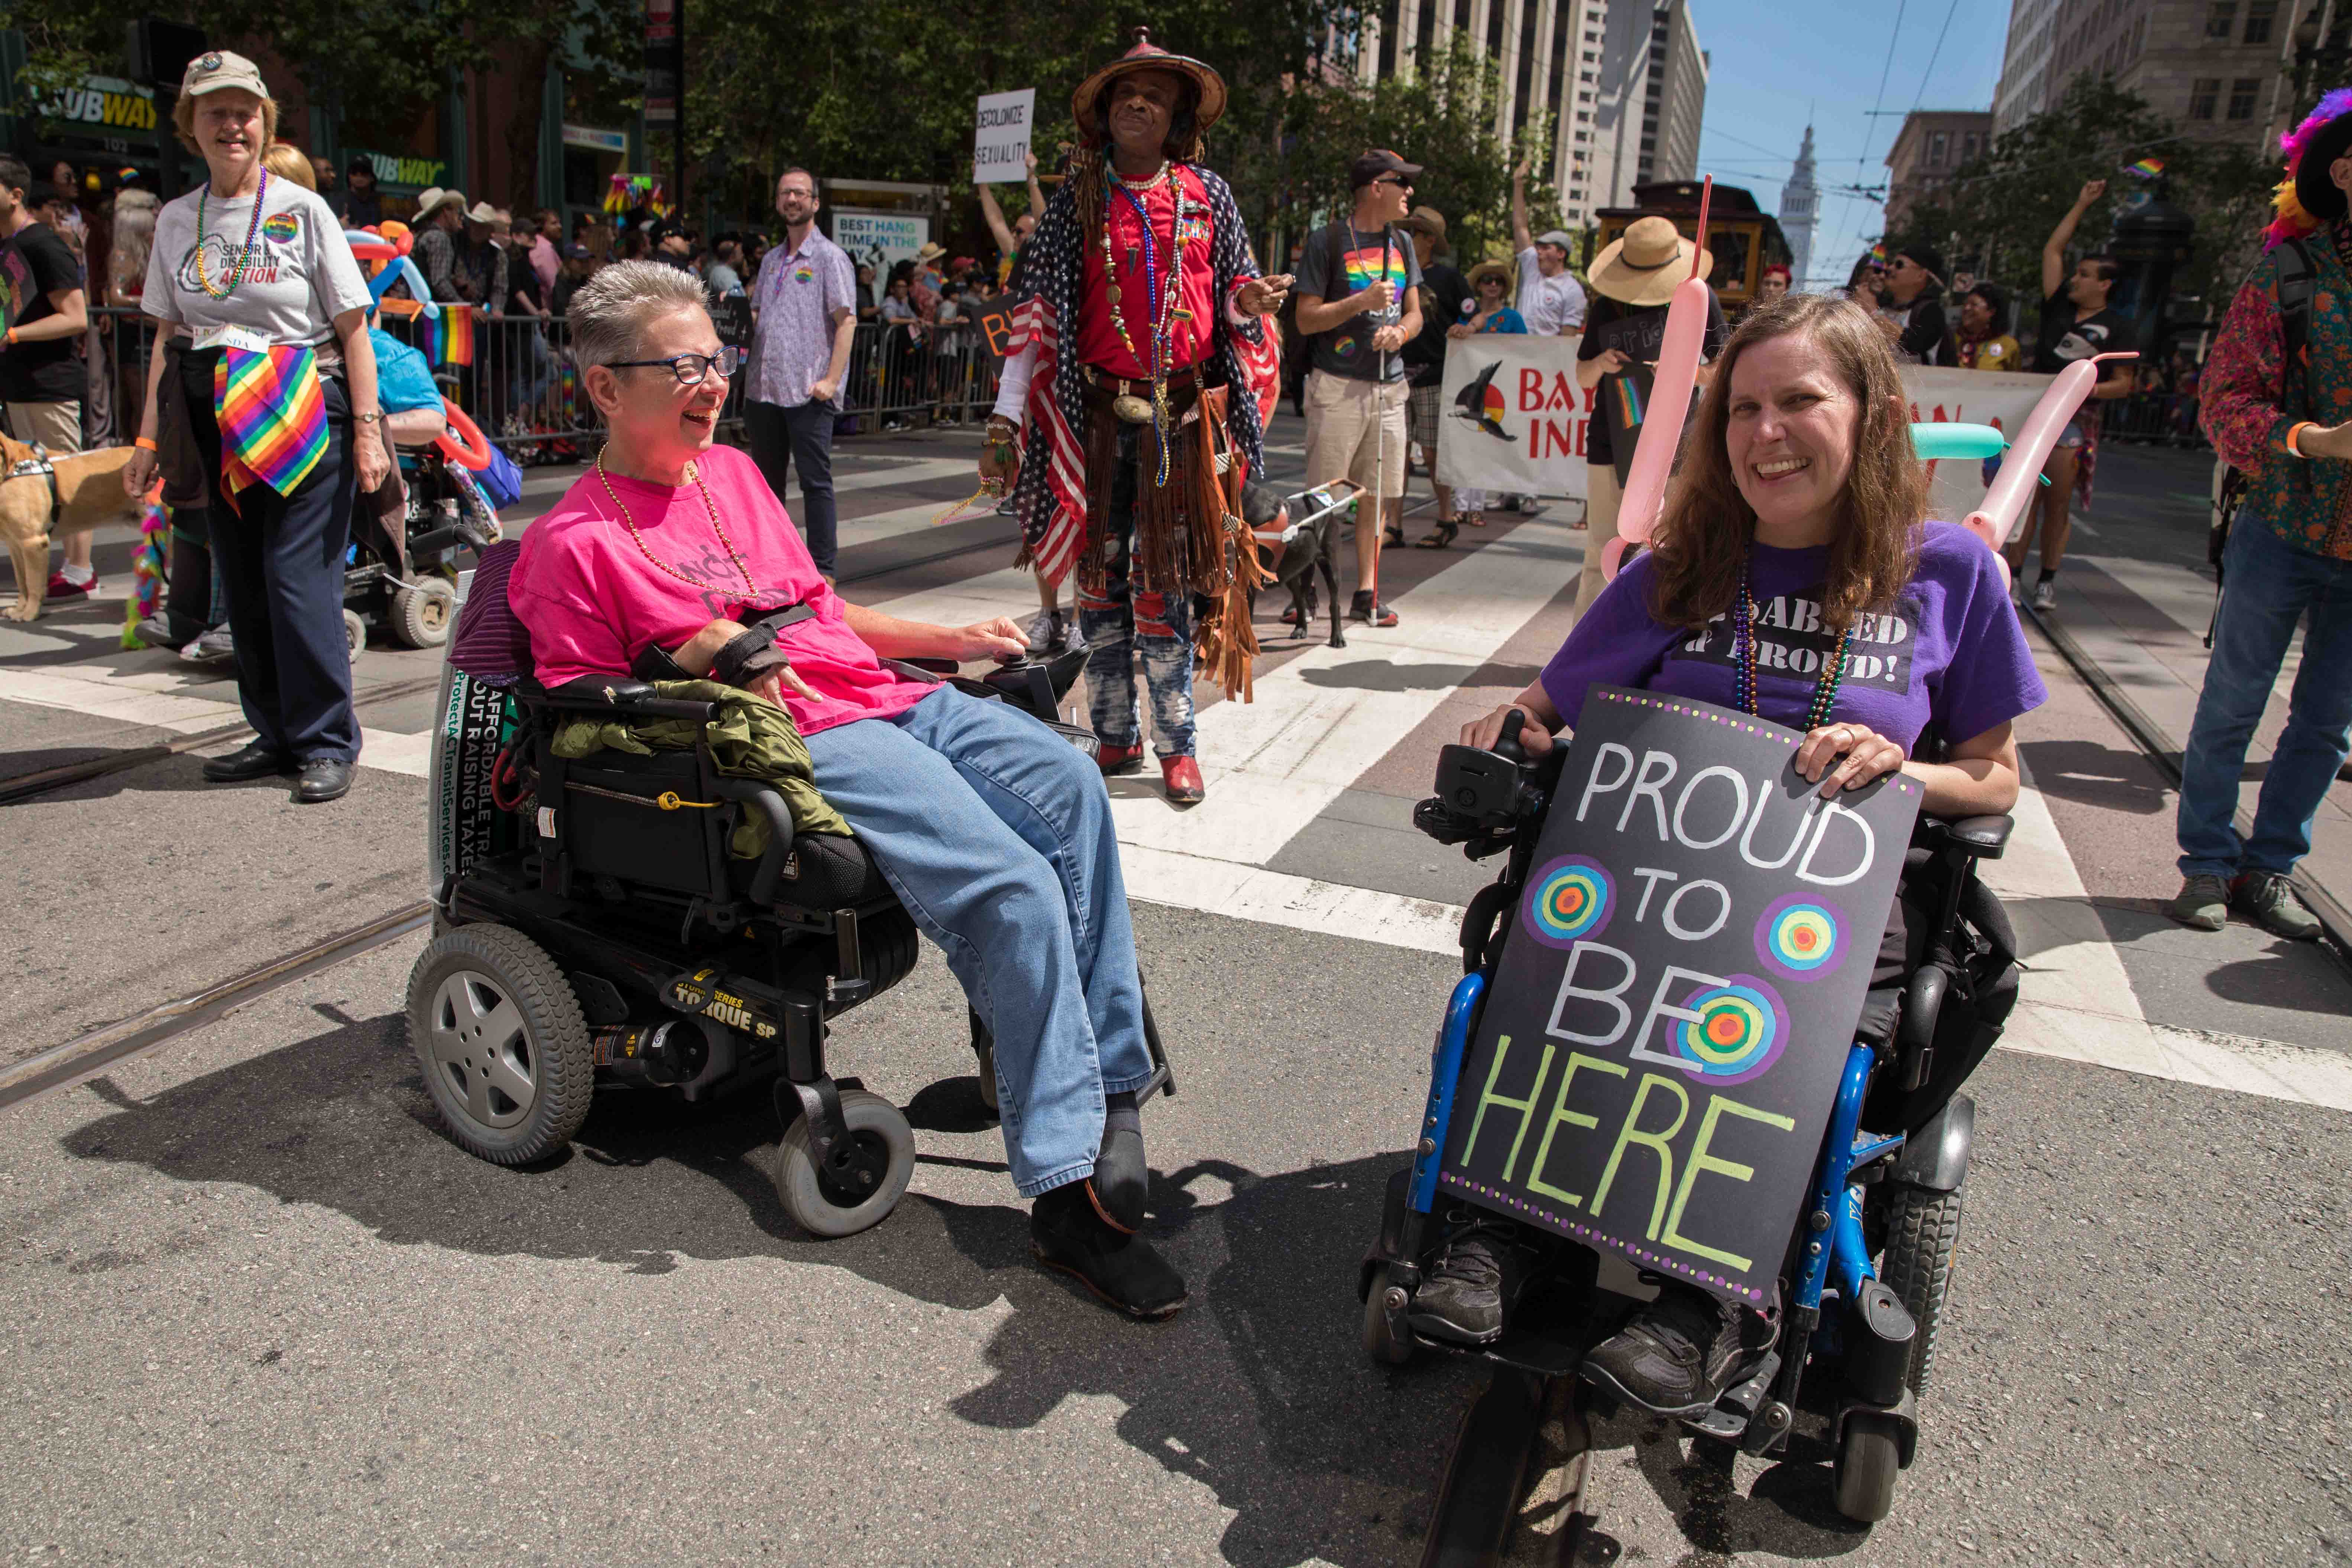 Two Pride participants in wheelchairs laugh while marching down market street with the contingent. One holds a sign that reads "Proud to be here."